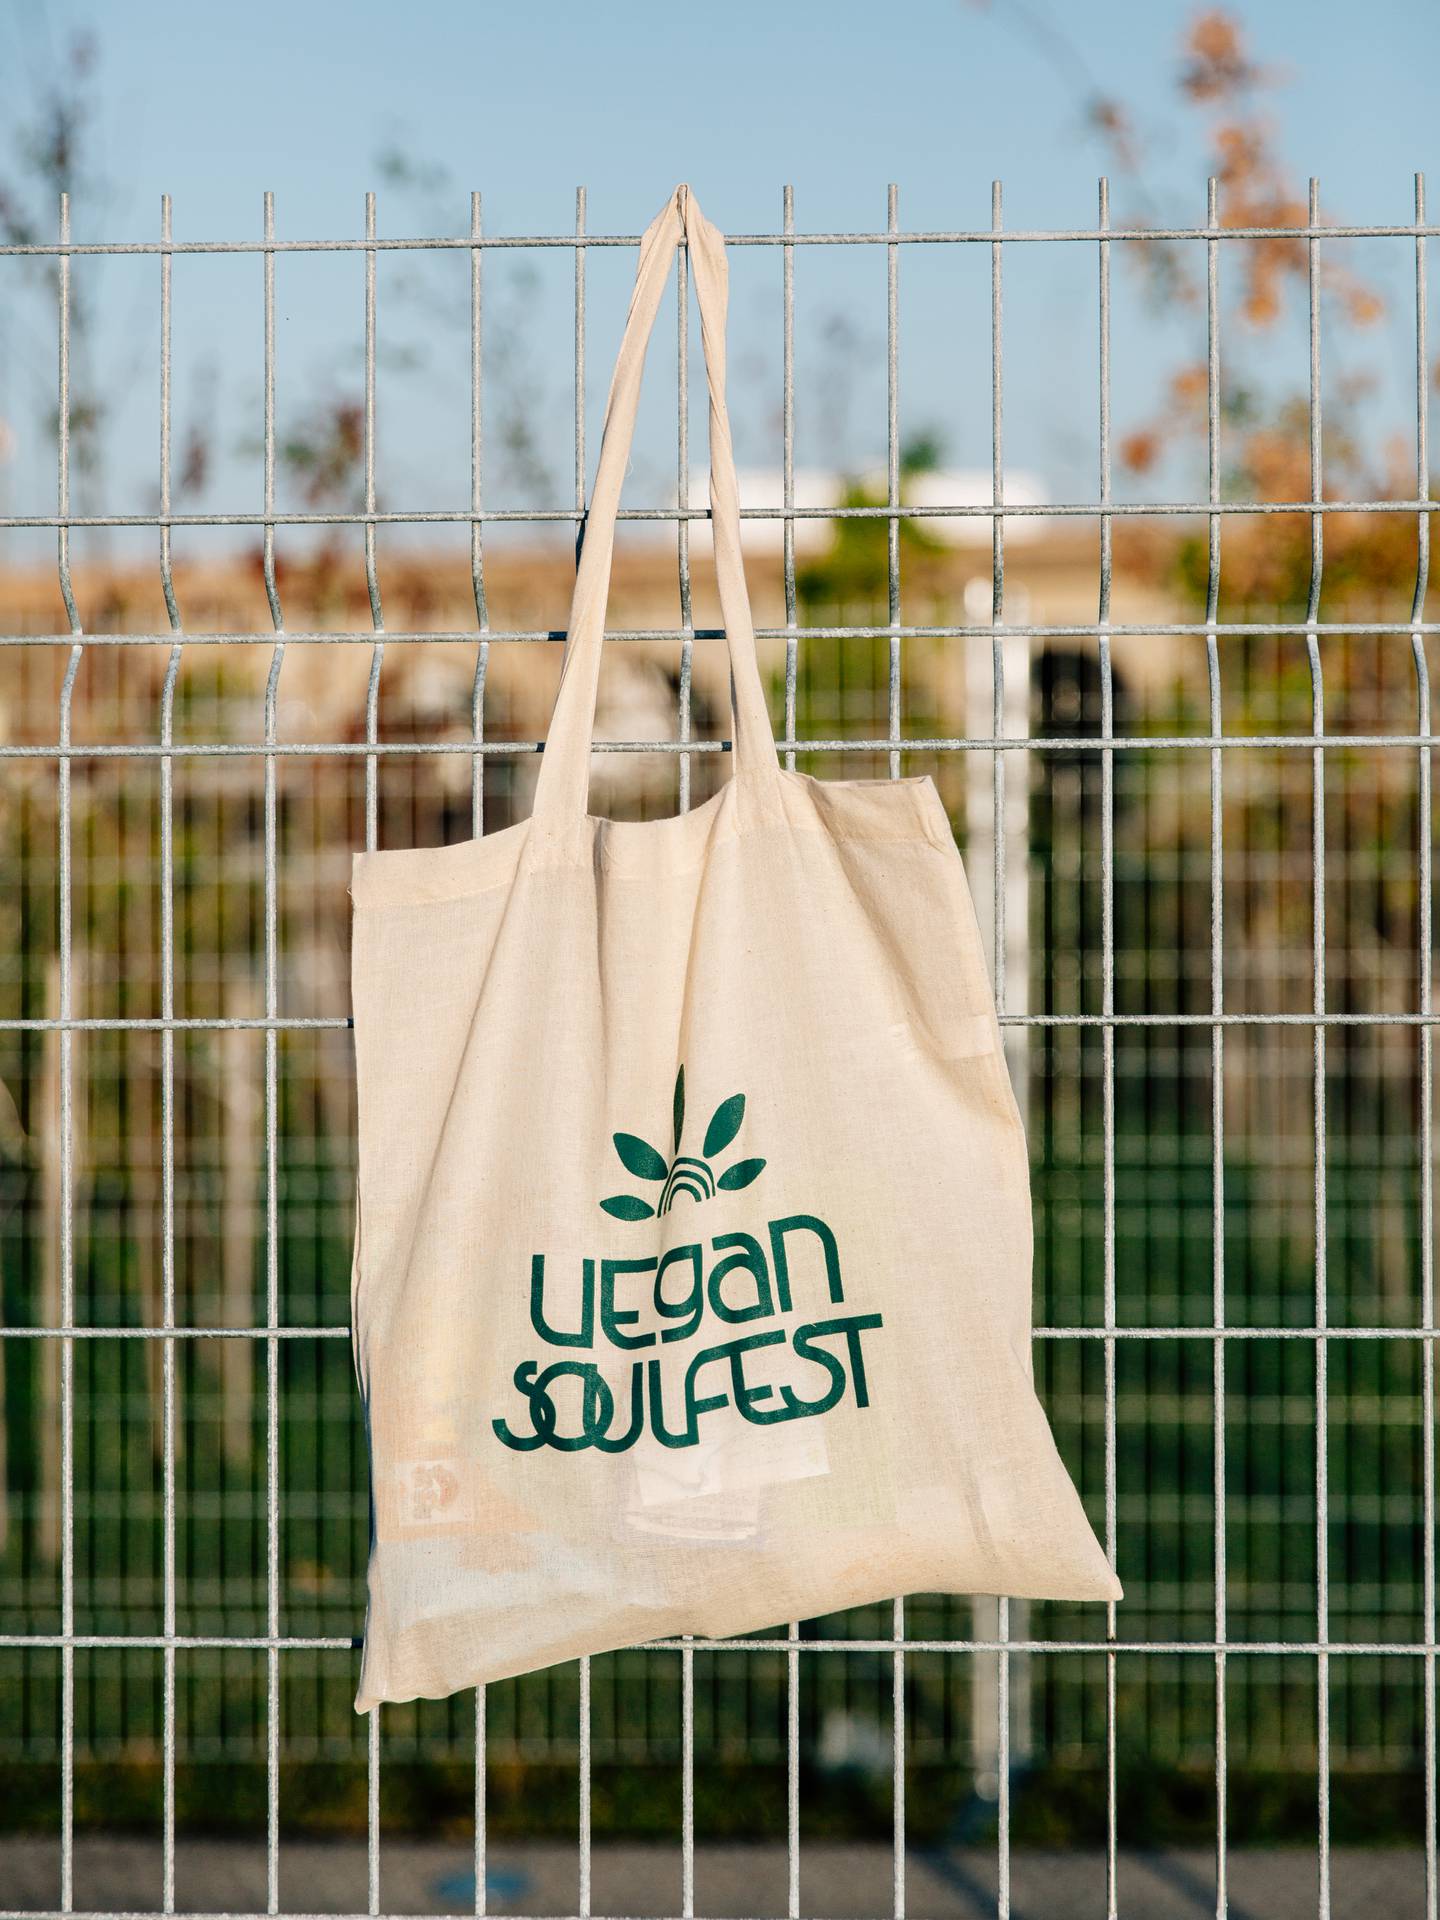 A Vegan SoulFest bag hangs from a fence during the three-day festival in 2022.